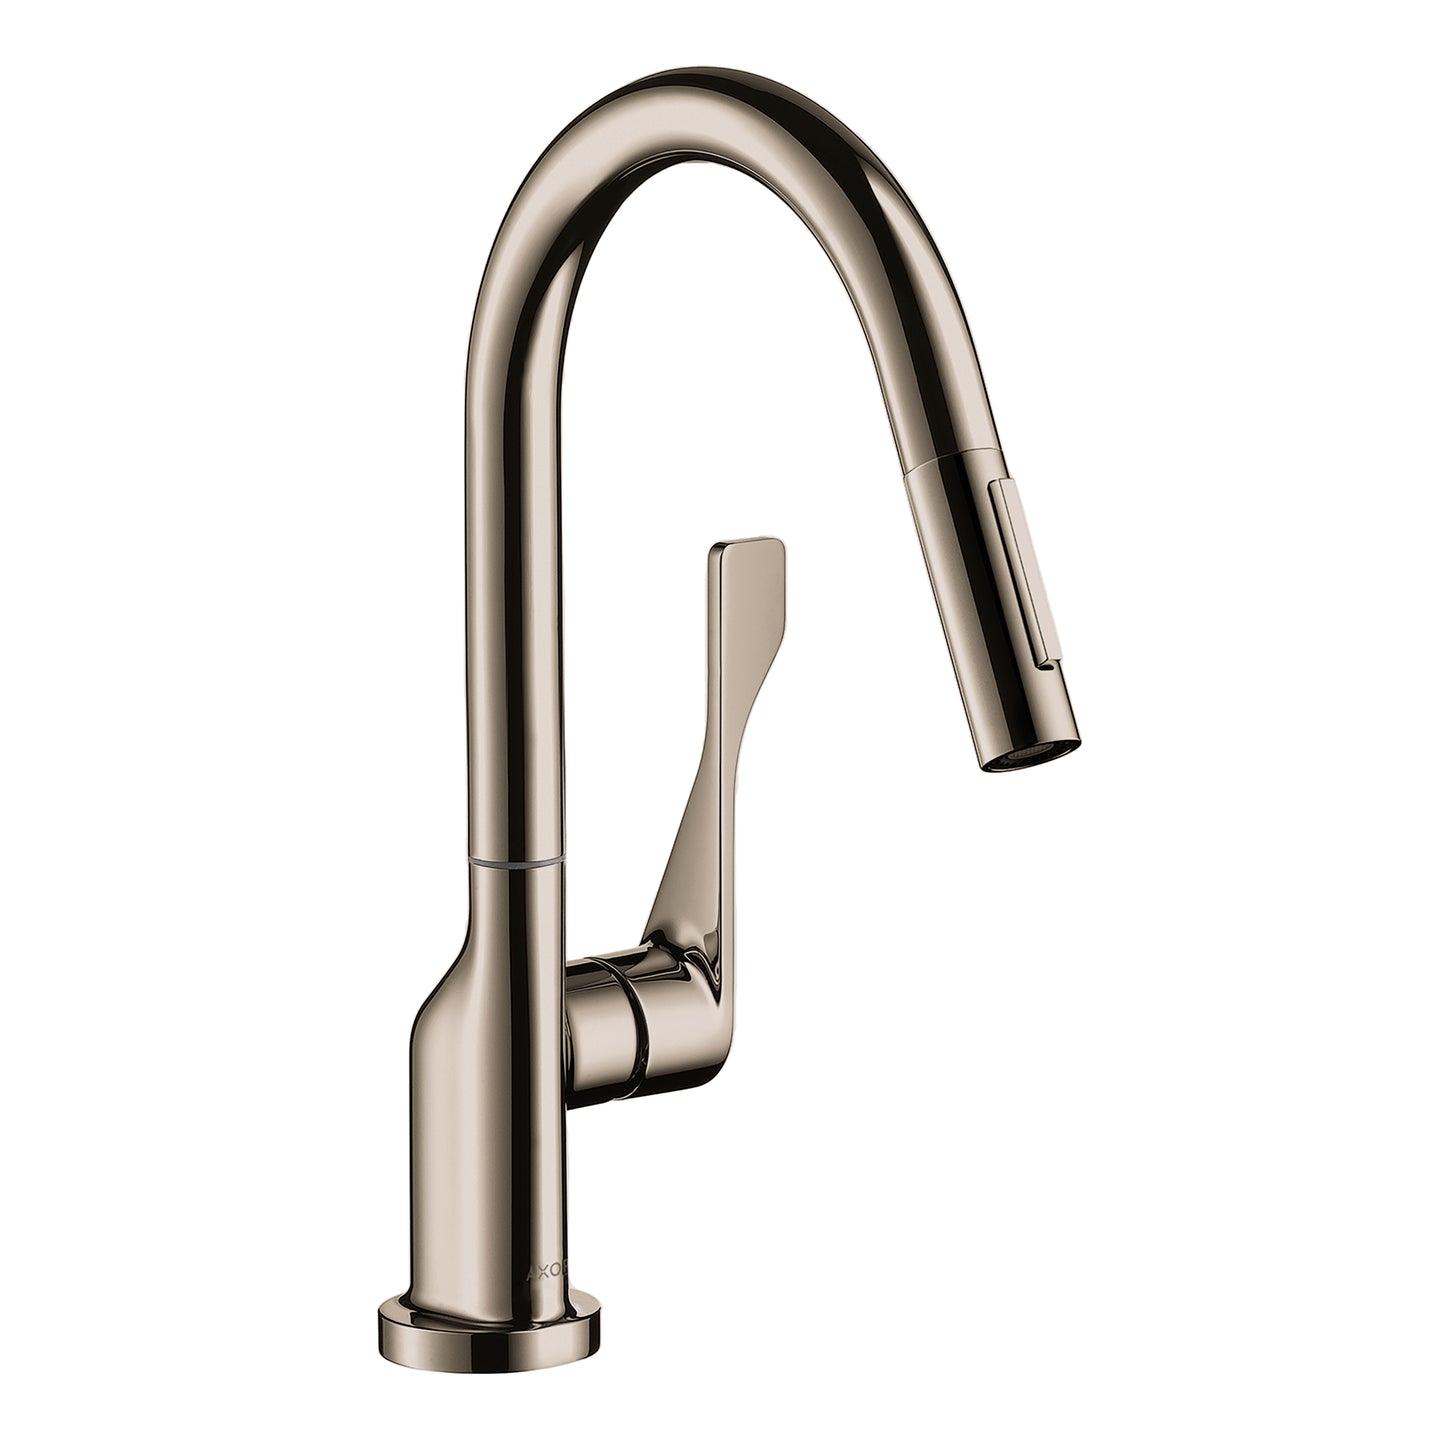 AXOR 39836831 Polished Nickel Citterio Modern Kitchen Faucet 1.75 GPM